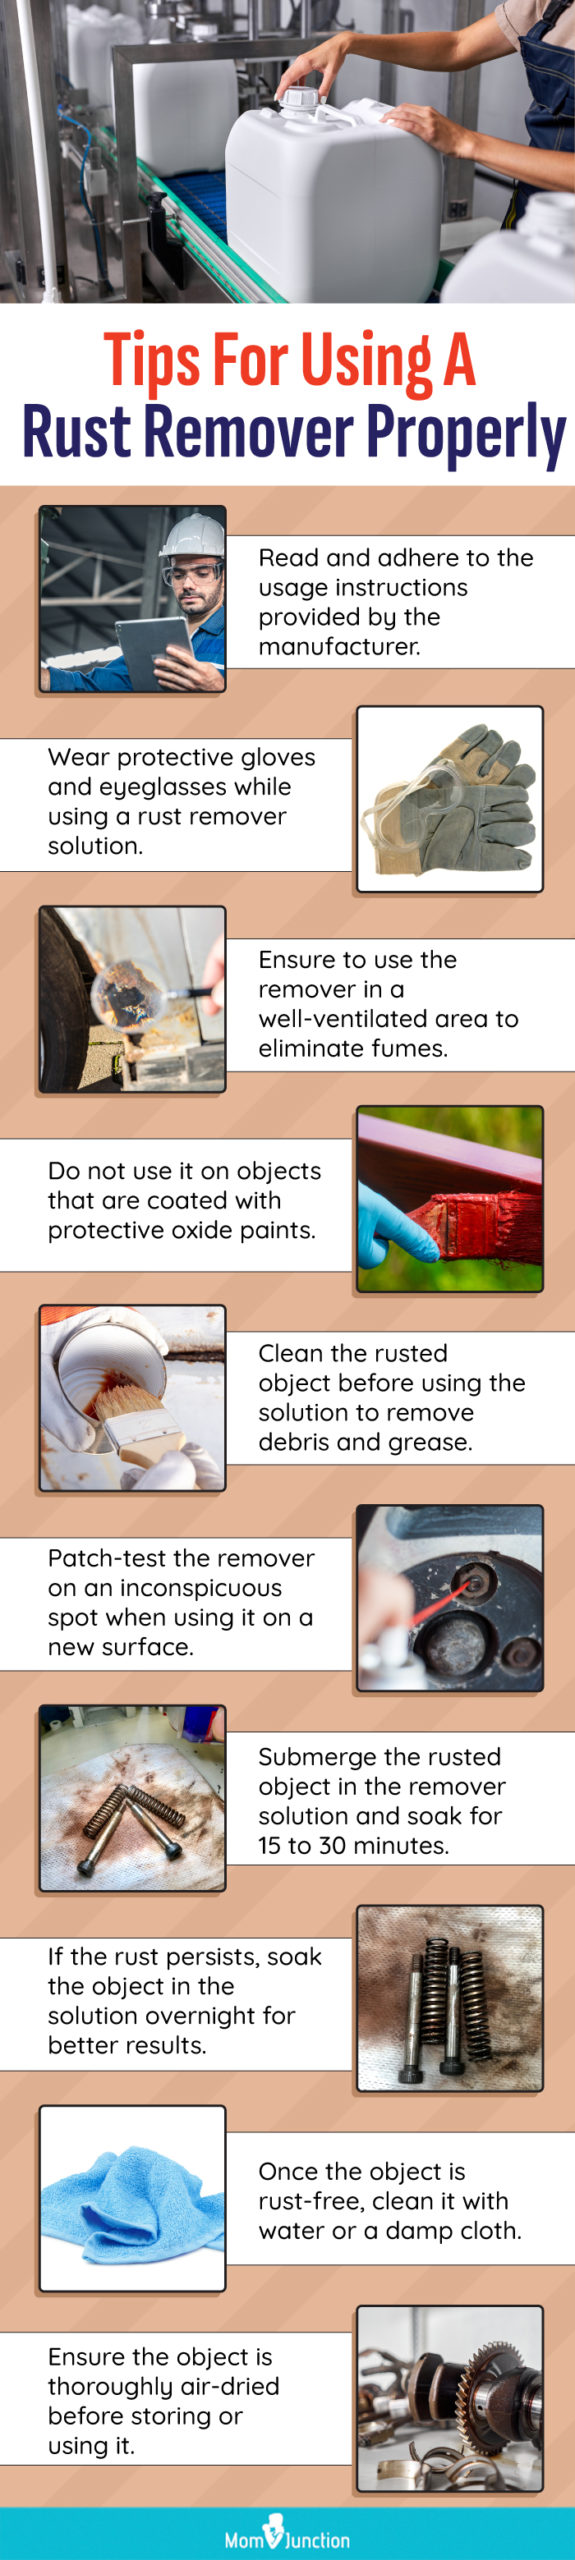 Tips For Using A Rust Remover Properly (infographic)